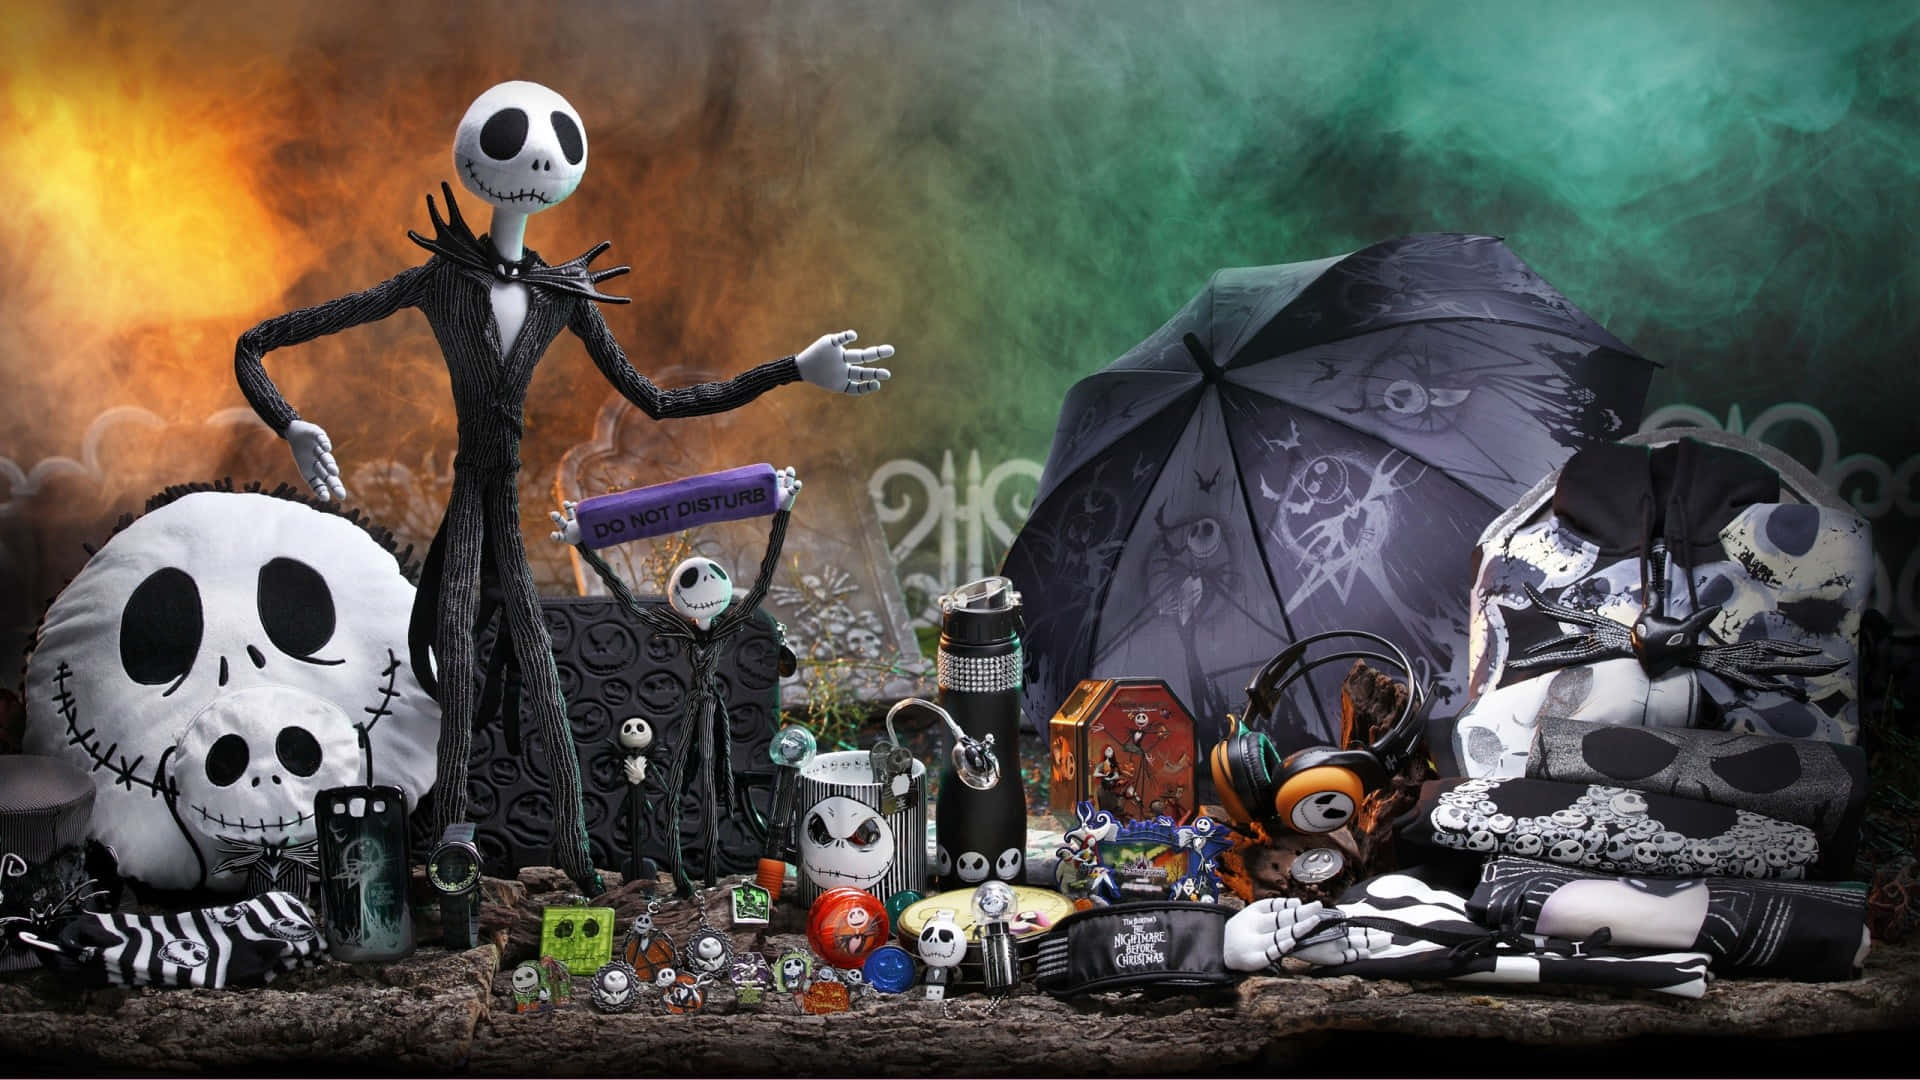 Get ready for an exciting Halloween with spooktacular props! Wallpaper